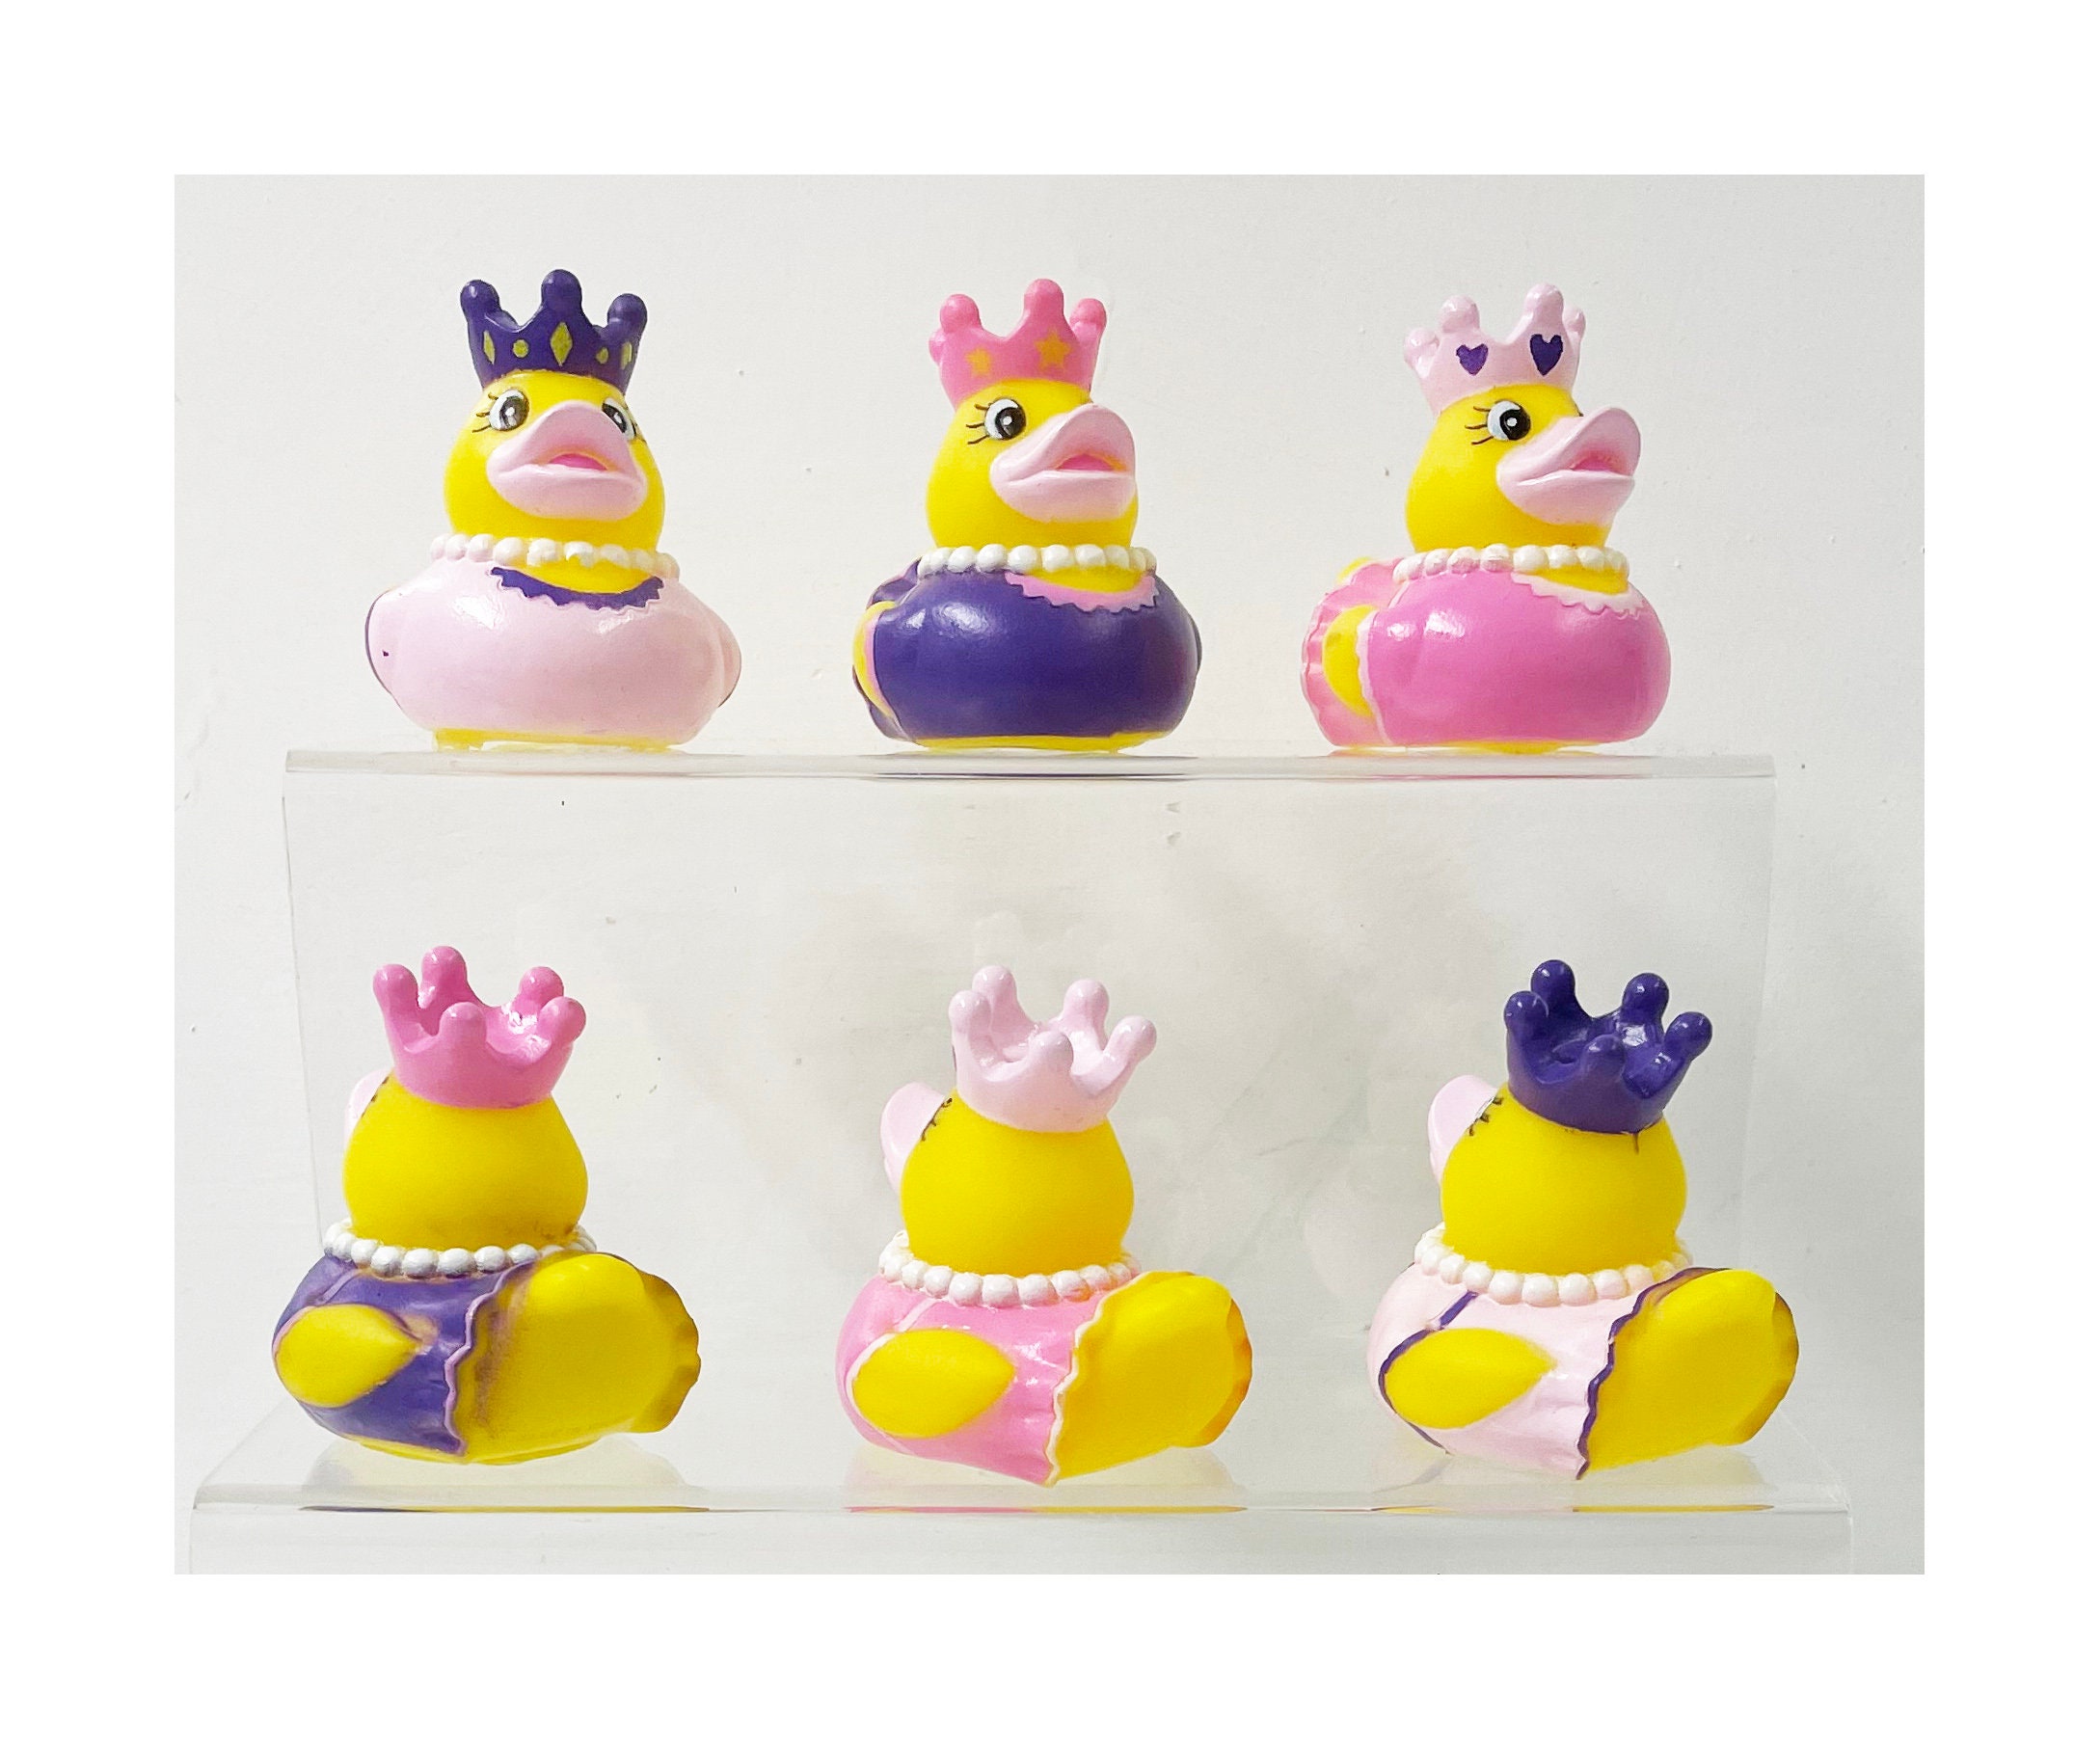 Queen Mini Rubber Duck Set: Fun Gift, Wedding Favour, Duck Race Etc. Set of  6 Cute Royal Theme Ducks in Disguise With Bright Crowns & Pearls -   Denmark